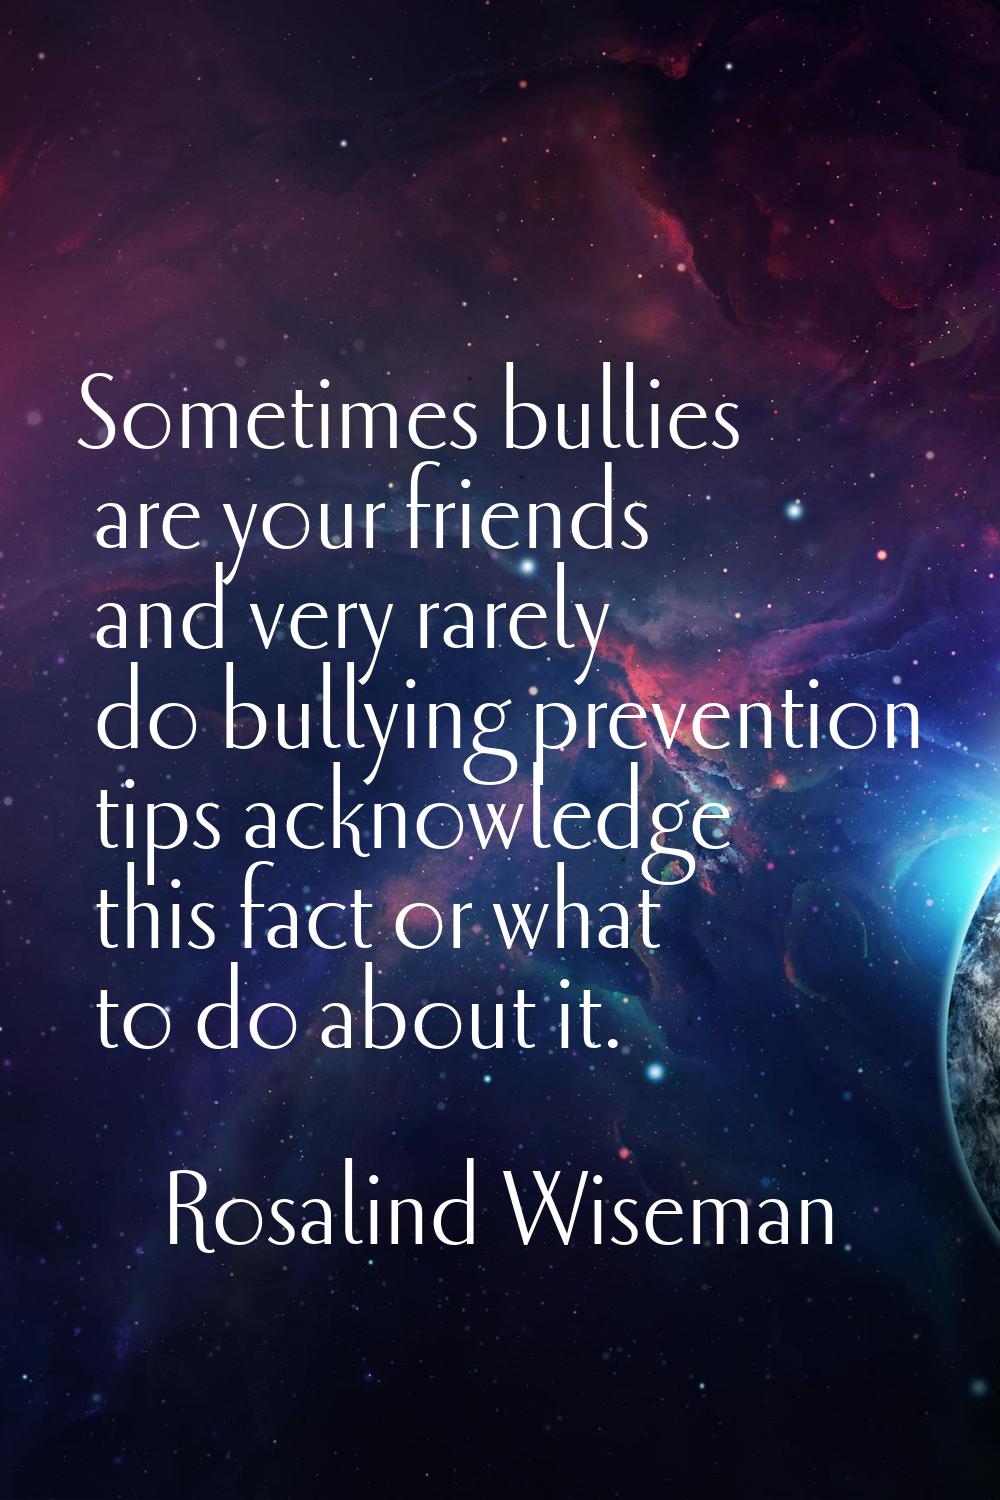 Sometimes bullies are your friends and very rarely do bullying prevention tips acknowledge this fac